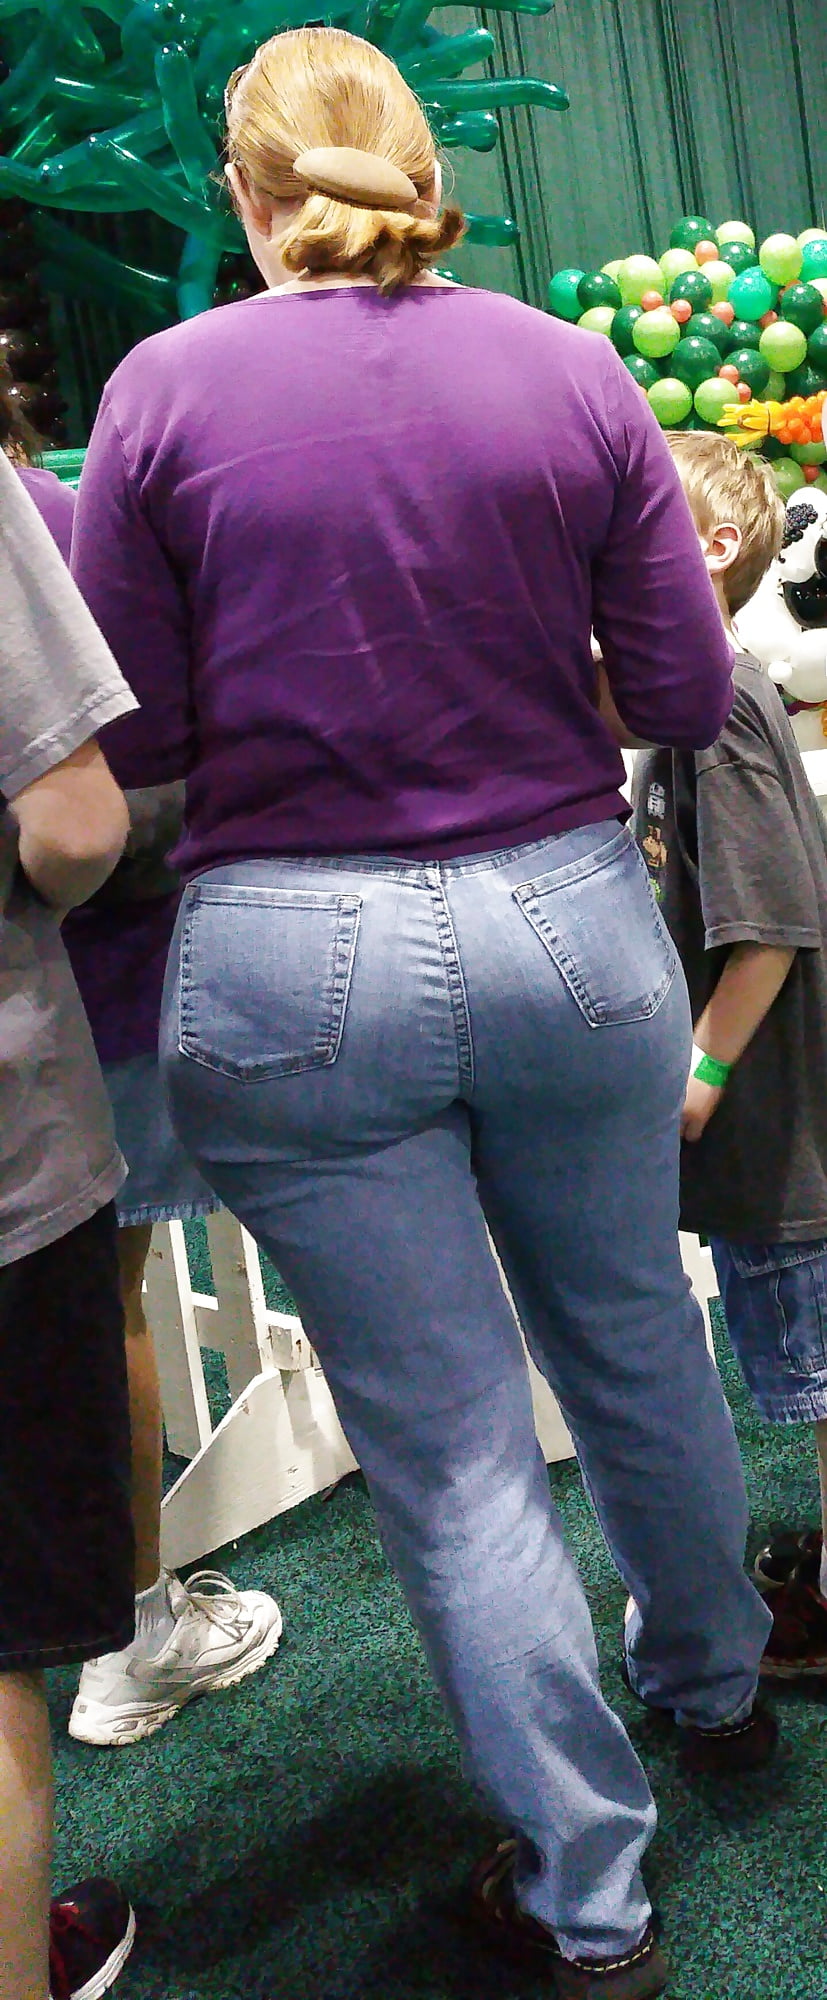 Big Ass MILF In Blue Jeans 30 Pics XHamster